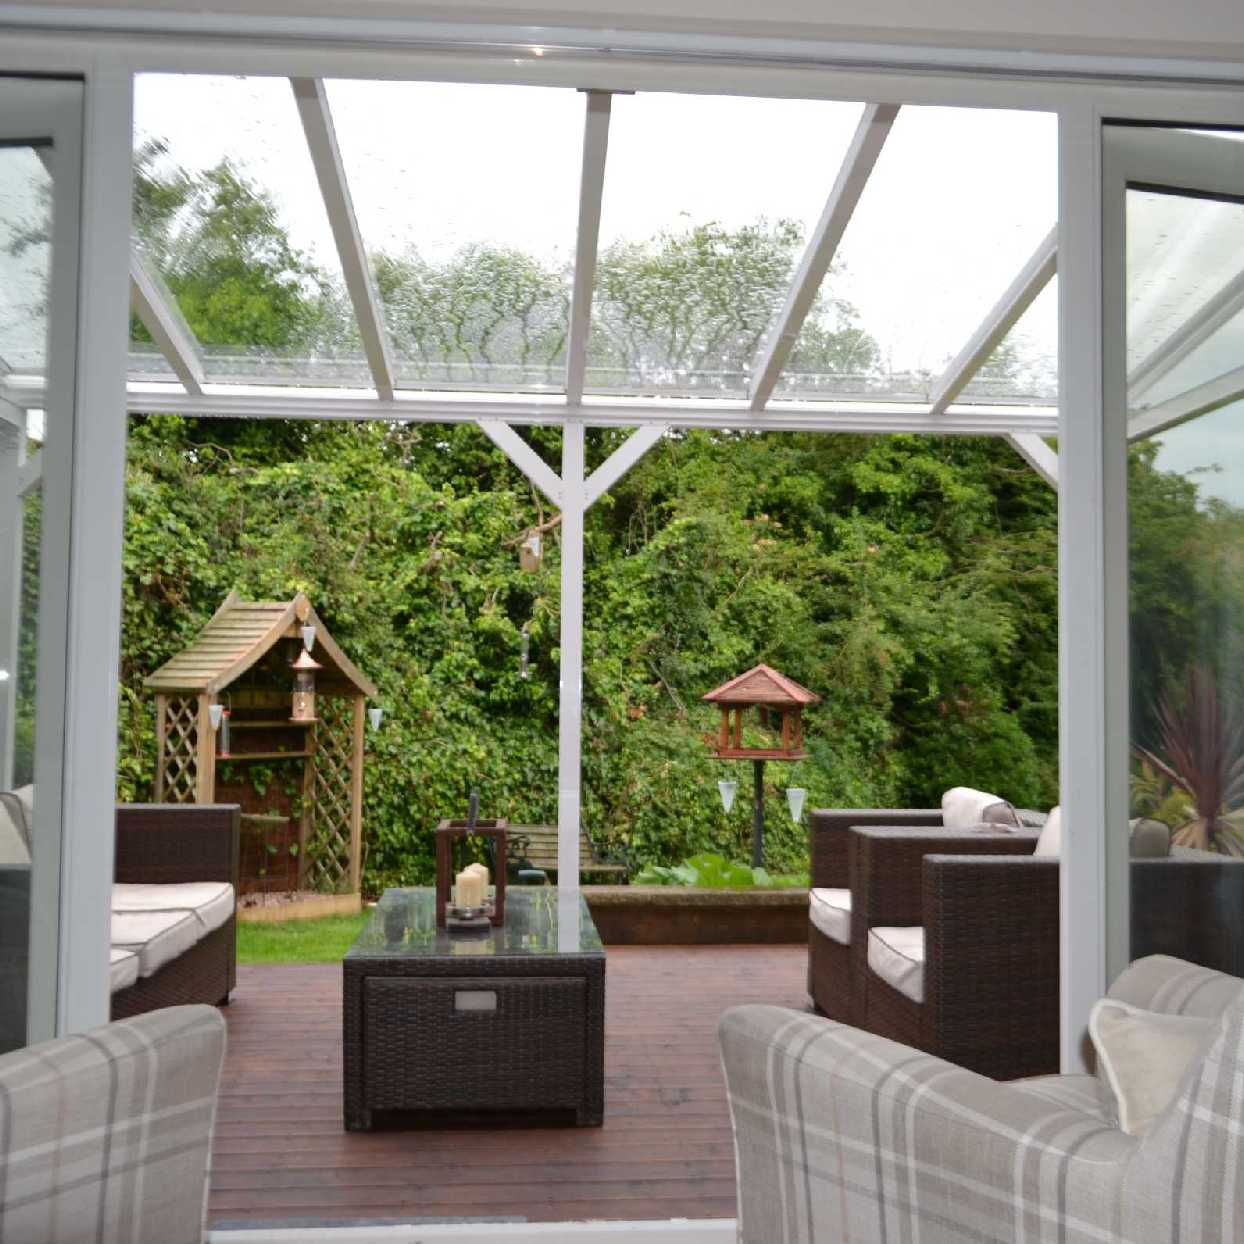 Buy Omega Smart Free-Standing, White MonoPitch Roof Canopy with 6mm Glass Clear Plate Polycarbonate Glazing - 3.5m (W) x 3.5m (P), (6) Supporting Posts online today